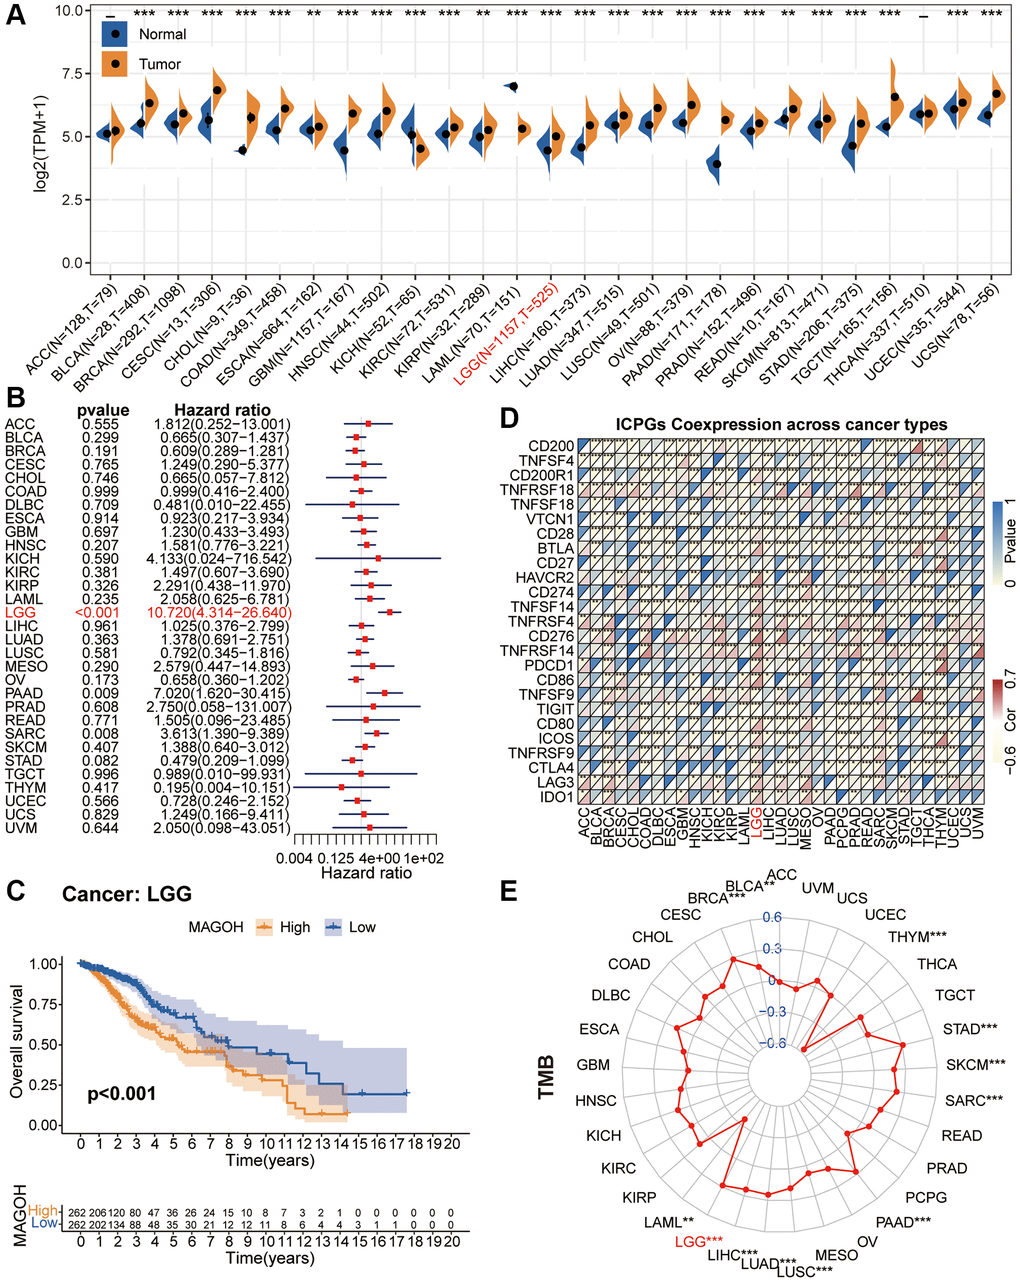 Pan-cancer analysis of MAGOH. (A) Differential expression of MAGOH in normal and cancer tissues. (B) Univariate Cox regression analysis of MAGOH expression in numerous tumors. (C) Kaplan-Meier analysis of MAGOH in pan-LGG. (D) Co-expression of MAGOH and ICPGs in various cancers. (E) Differential TMB in multiple cancers. *P **P ***P 